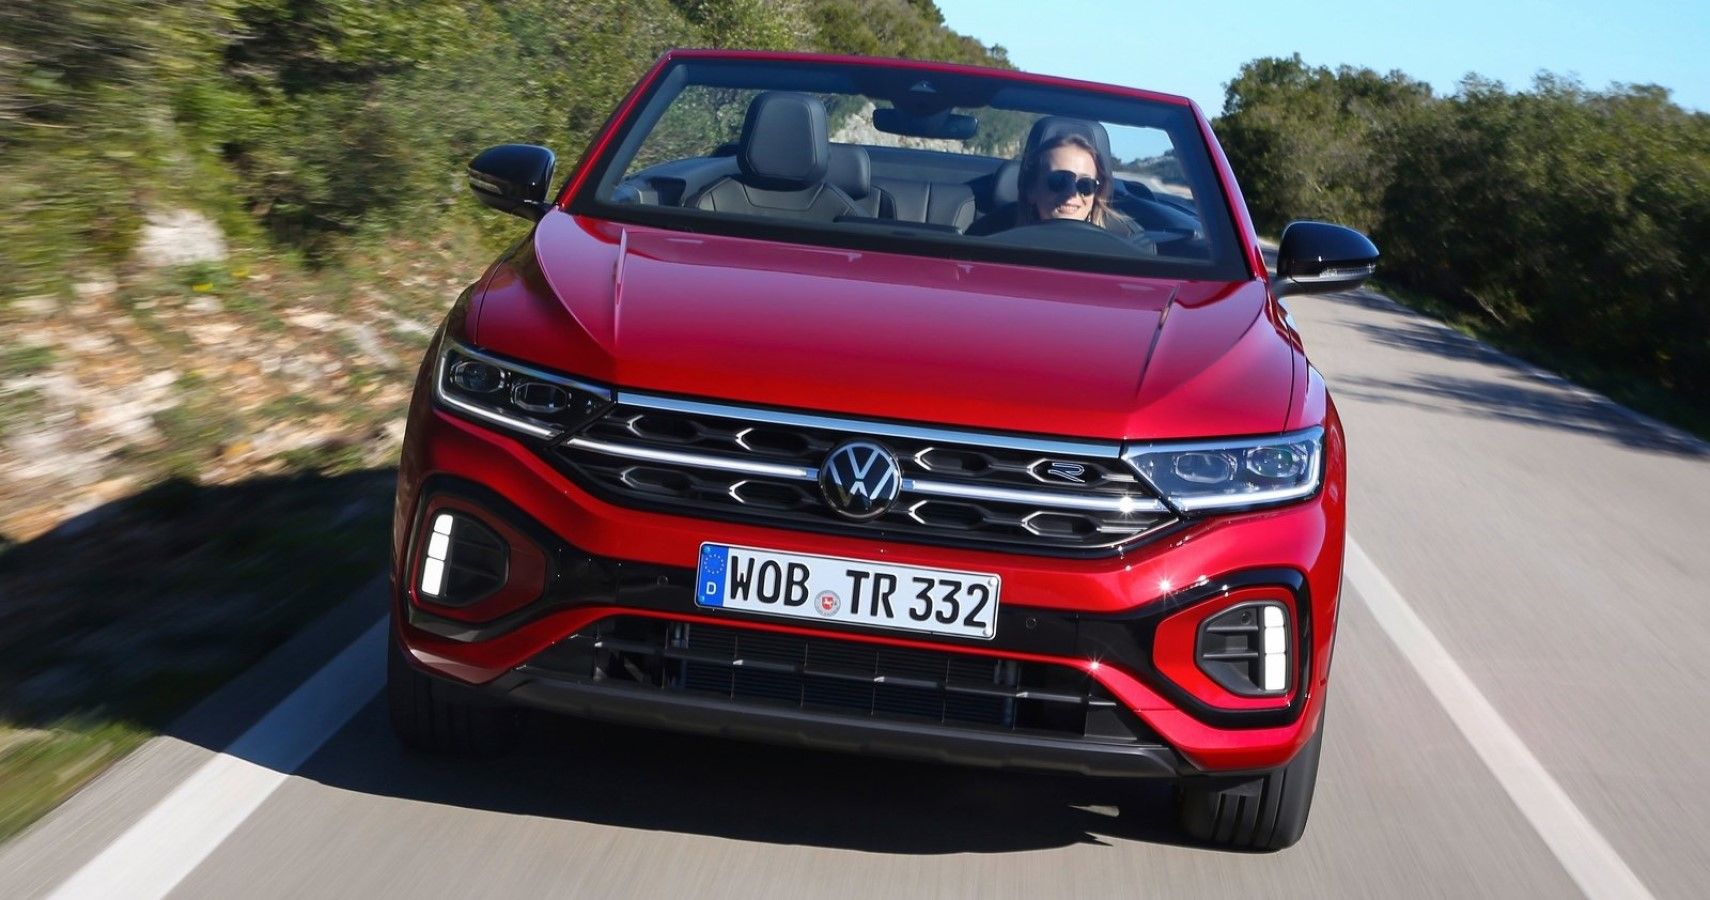 The Volkswagen T-Roc Cabriolet Is An Awesome Convertible SUV